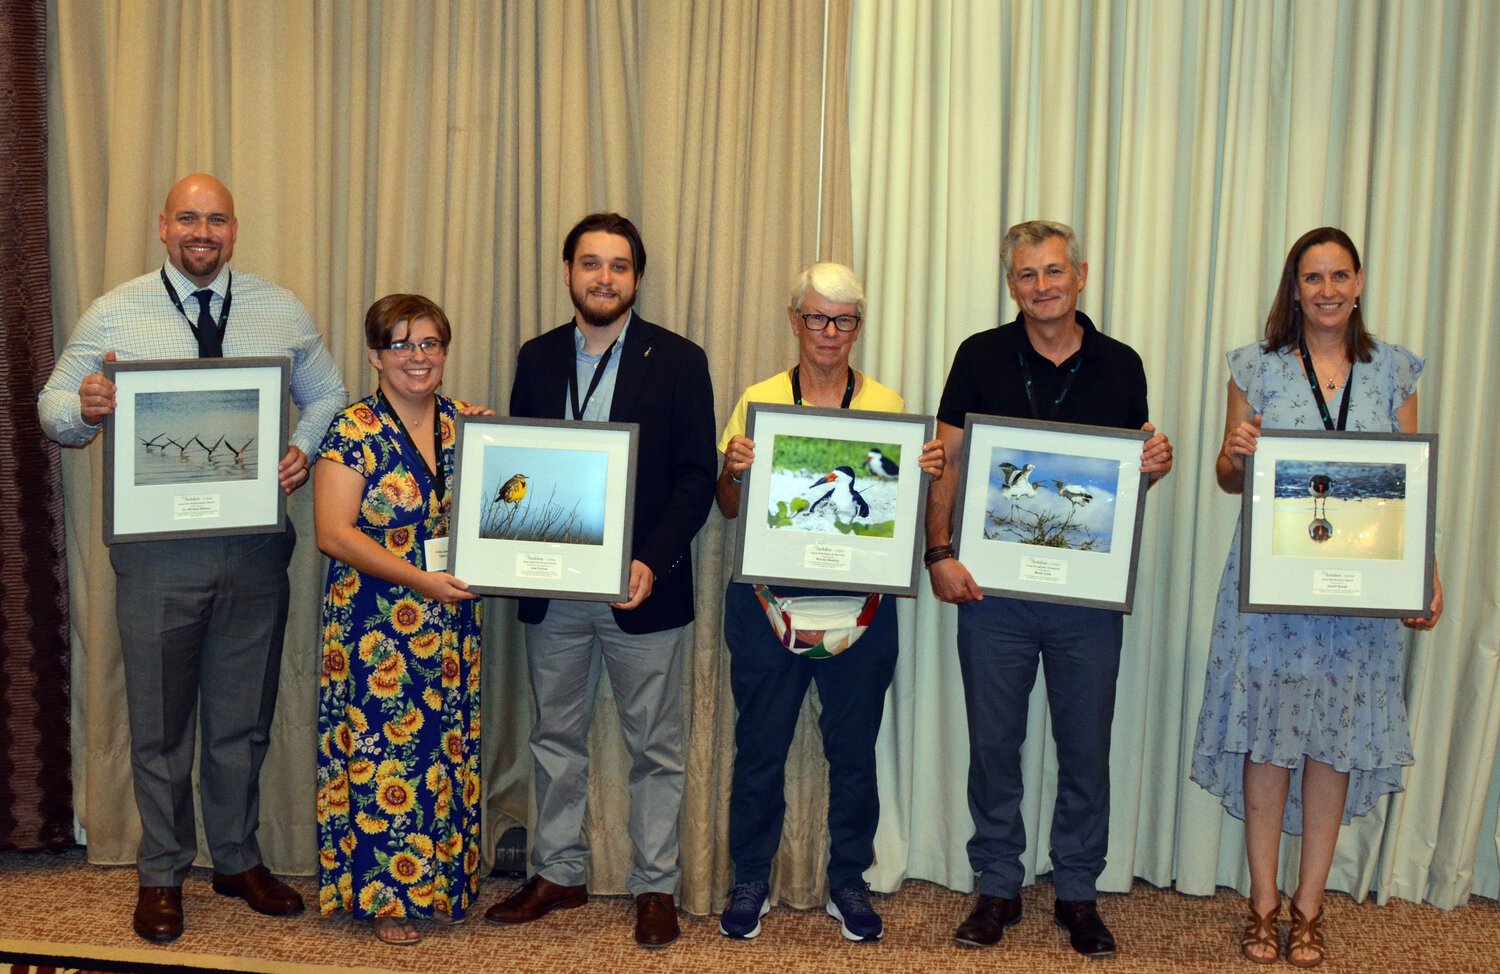 Audubon Florida's 2023 conservation leaders included (left to right): Lt. Michael Bibeau, Joe Earl Collins, II (accepted by family members Eli Collins and Katie Everett), Wendy Meehan, Mark Cook, and Janell Brush. Photo: Charles Lee/Audubon Florida.